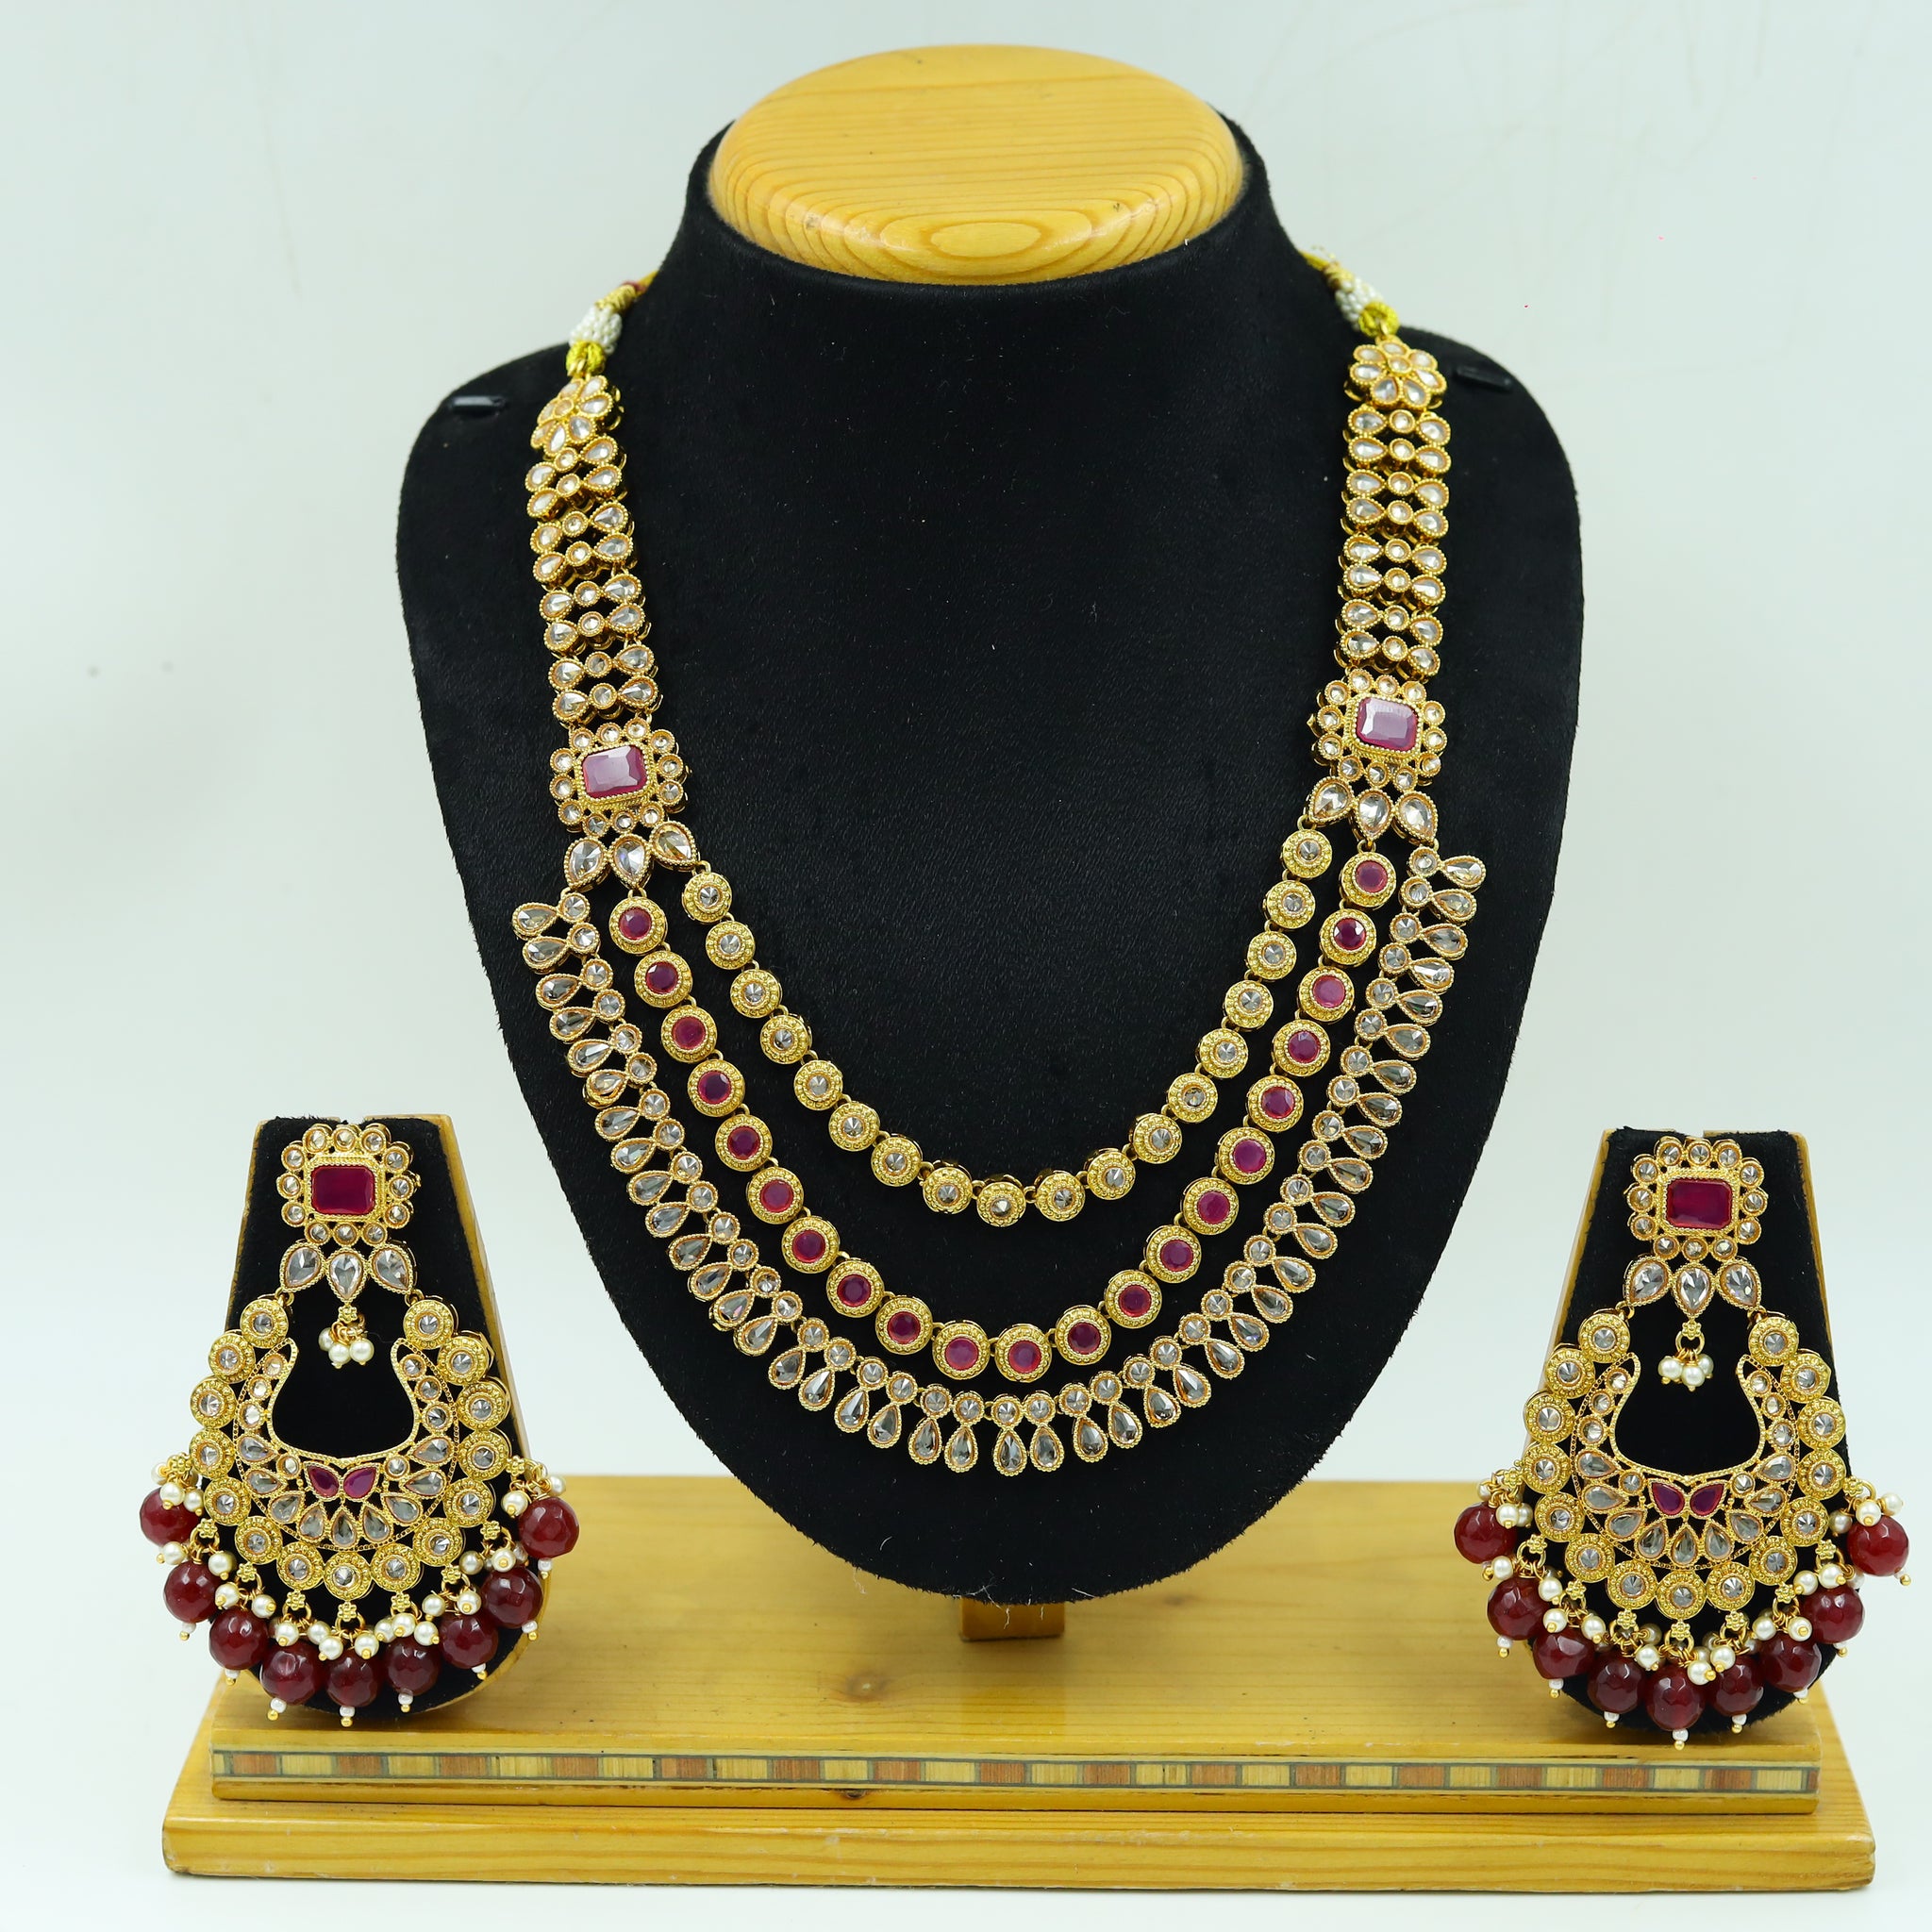 Round Neck Layered Gold Look Necklace Set 13551-28